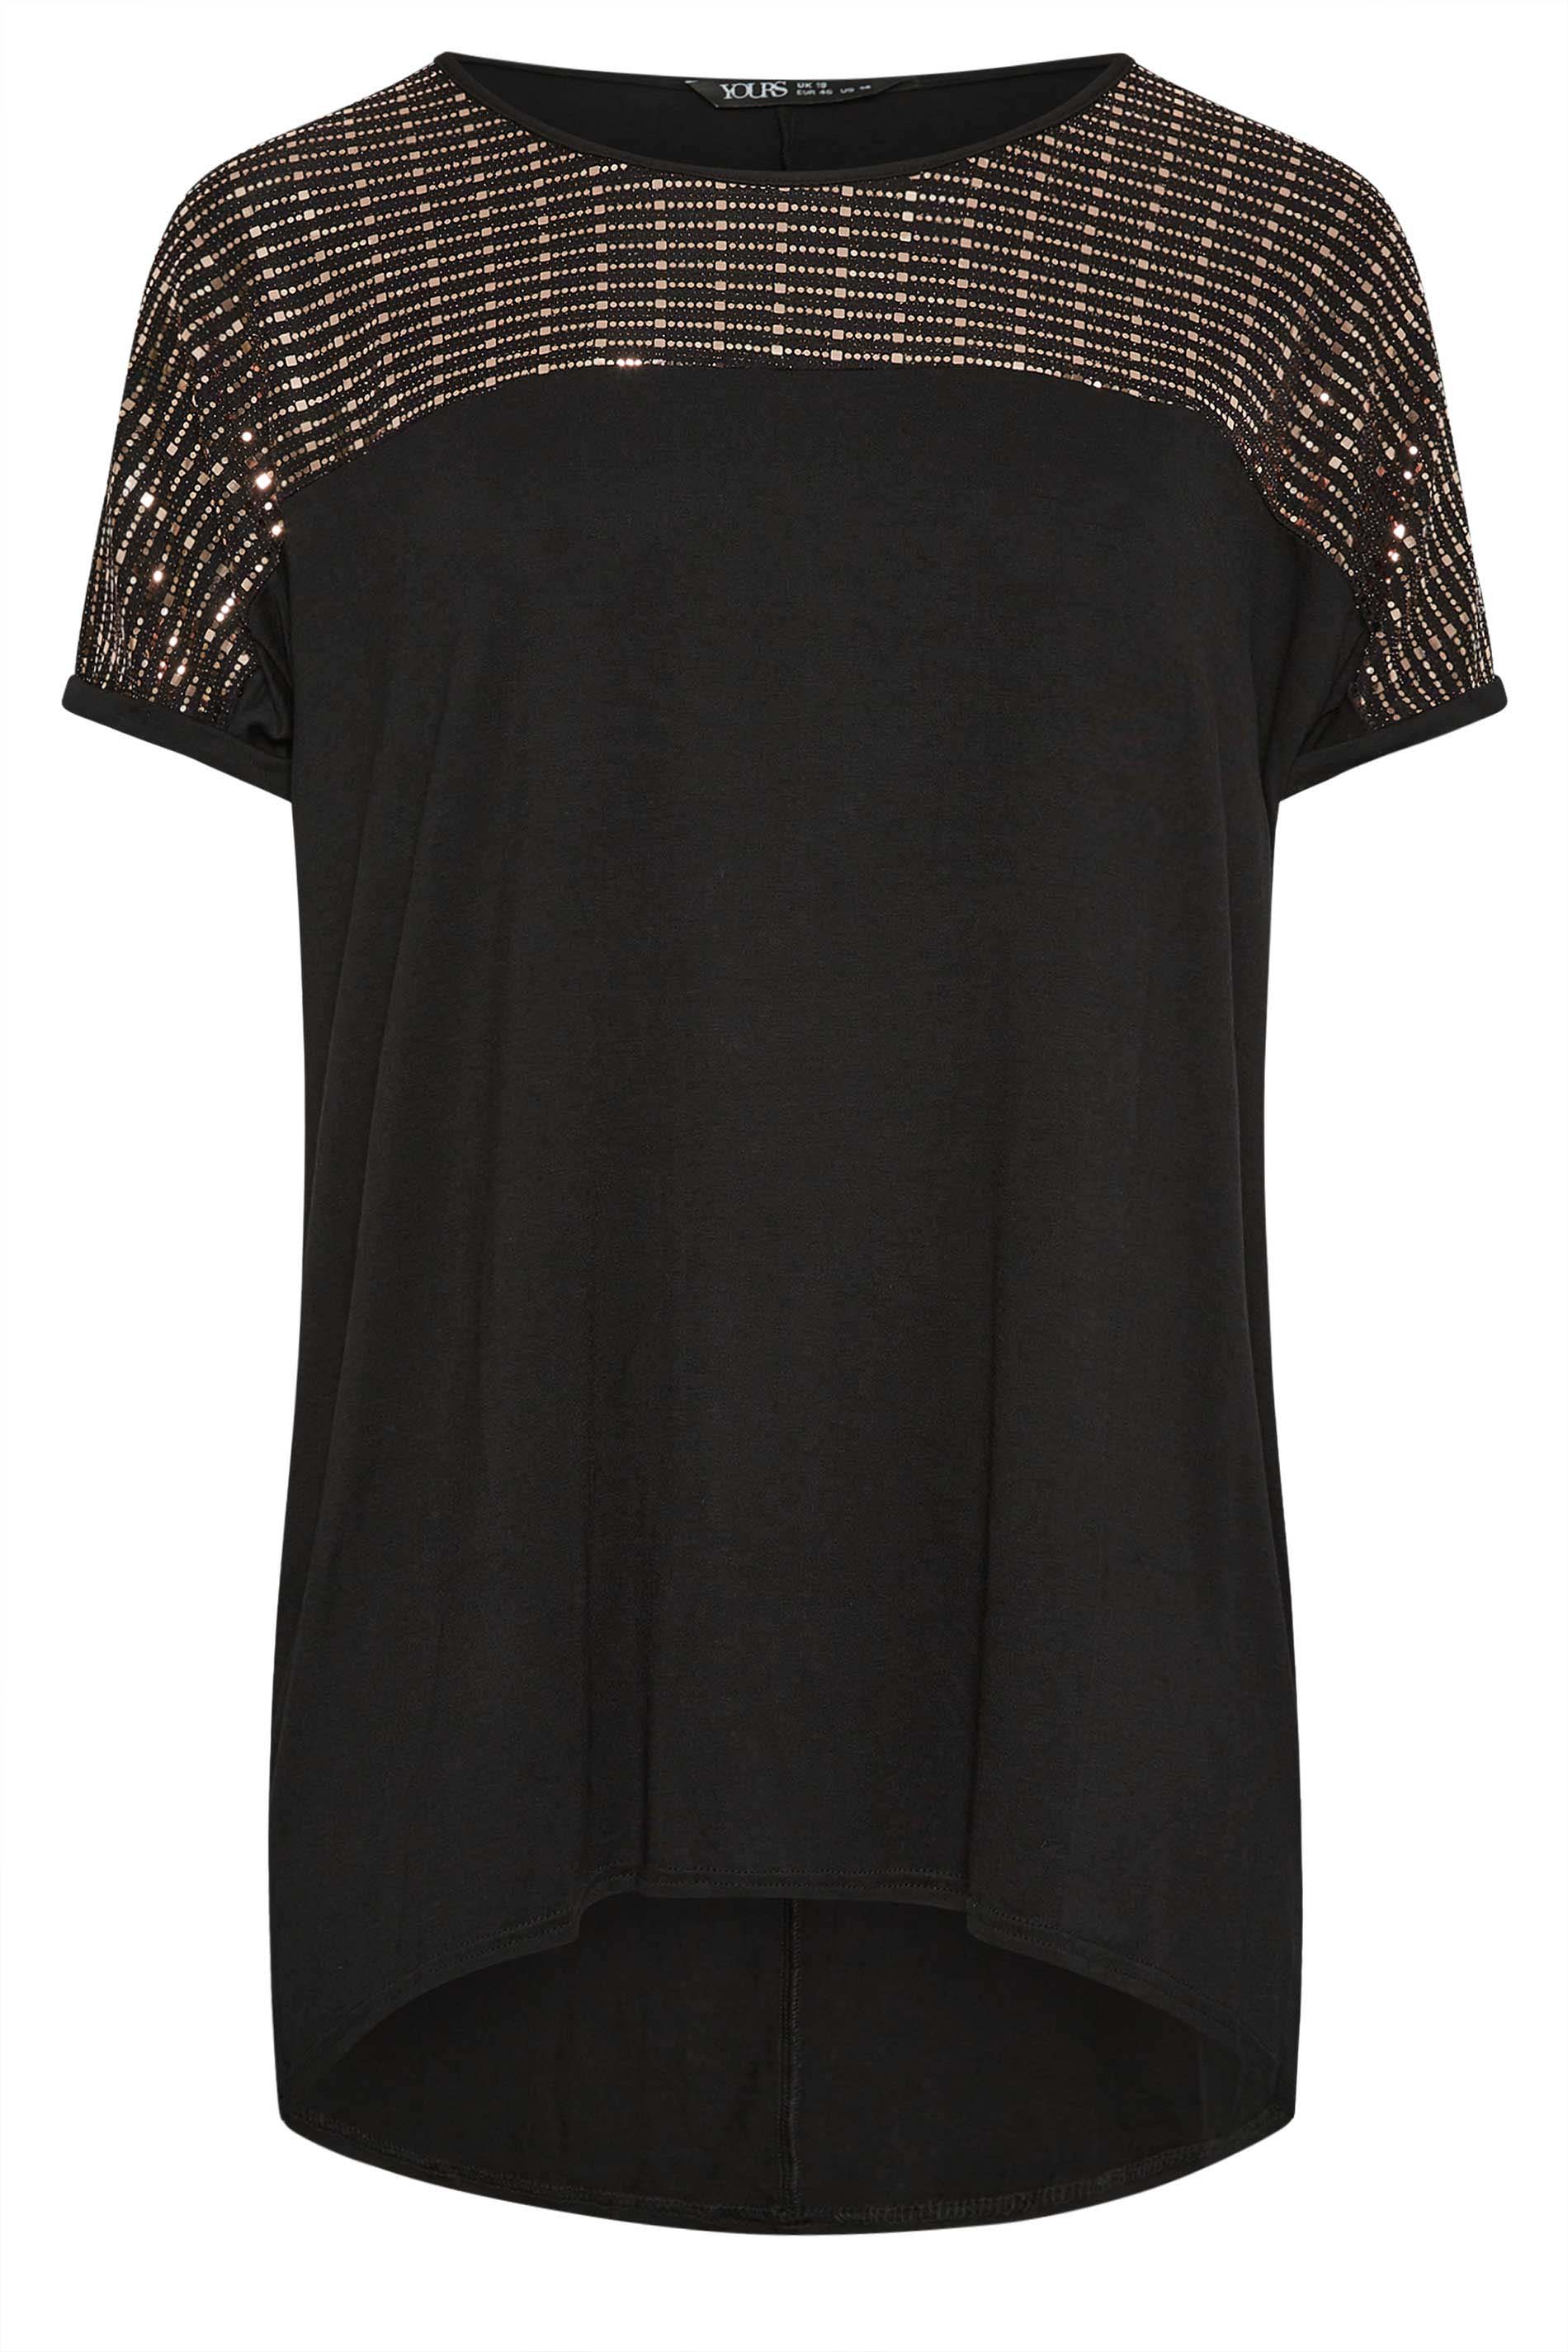 YOURS Plus Size Black & Rose Gold Sequin Embellished Top | Yours Clothing